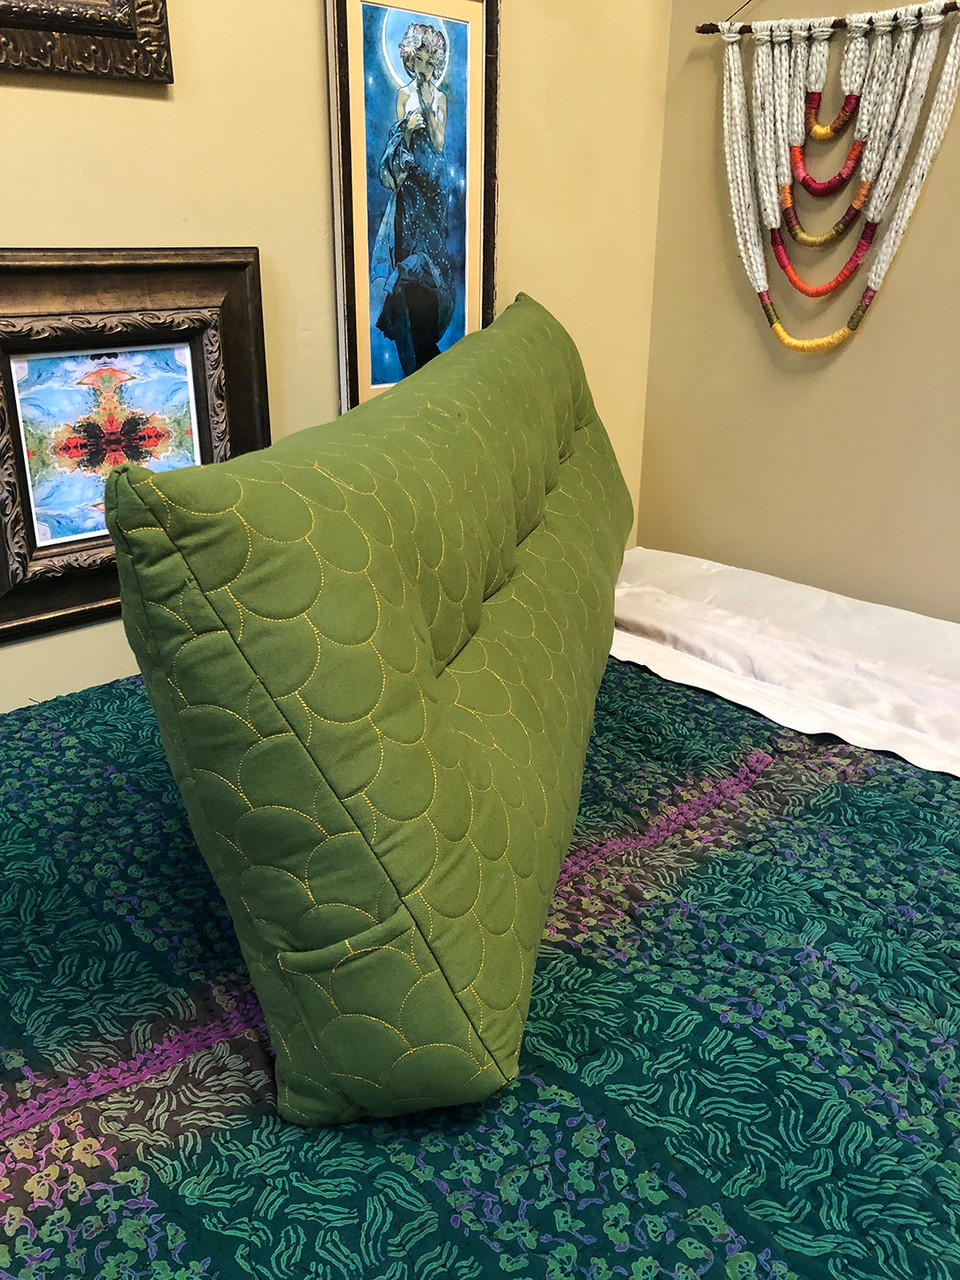 https://cdn11.bigcommerce.com/s-ndgwf6iffo/images/stencil/original/products/2521/12097/indie-ella-queen-bed-headboard-pillow-reading-wedge-cushion-60-in-moss-green-quilted-canvas__70289.1663152110.jpg